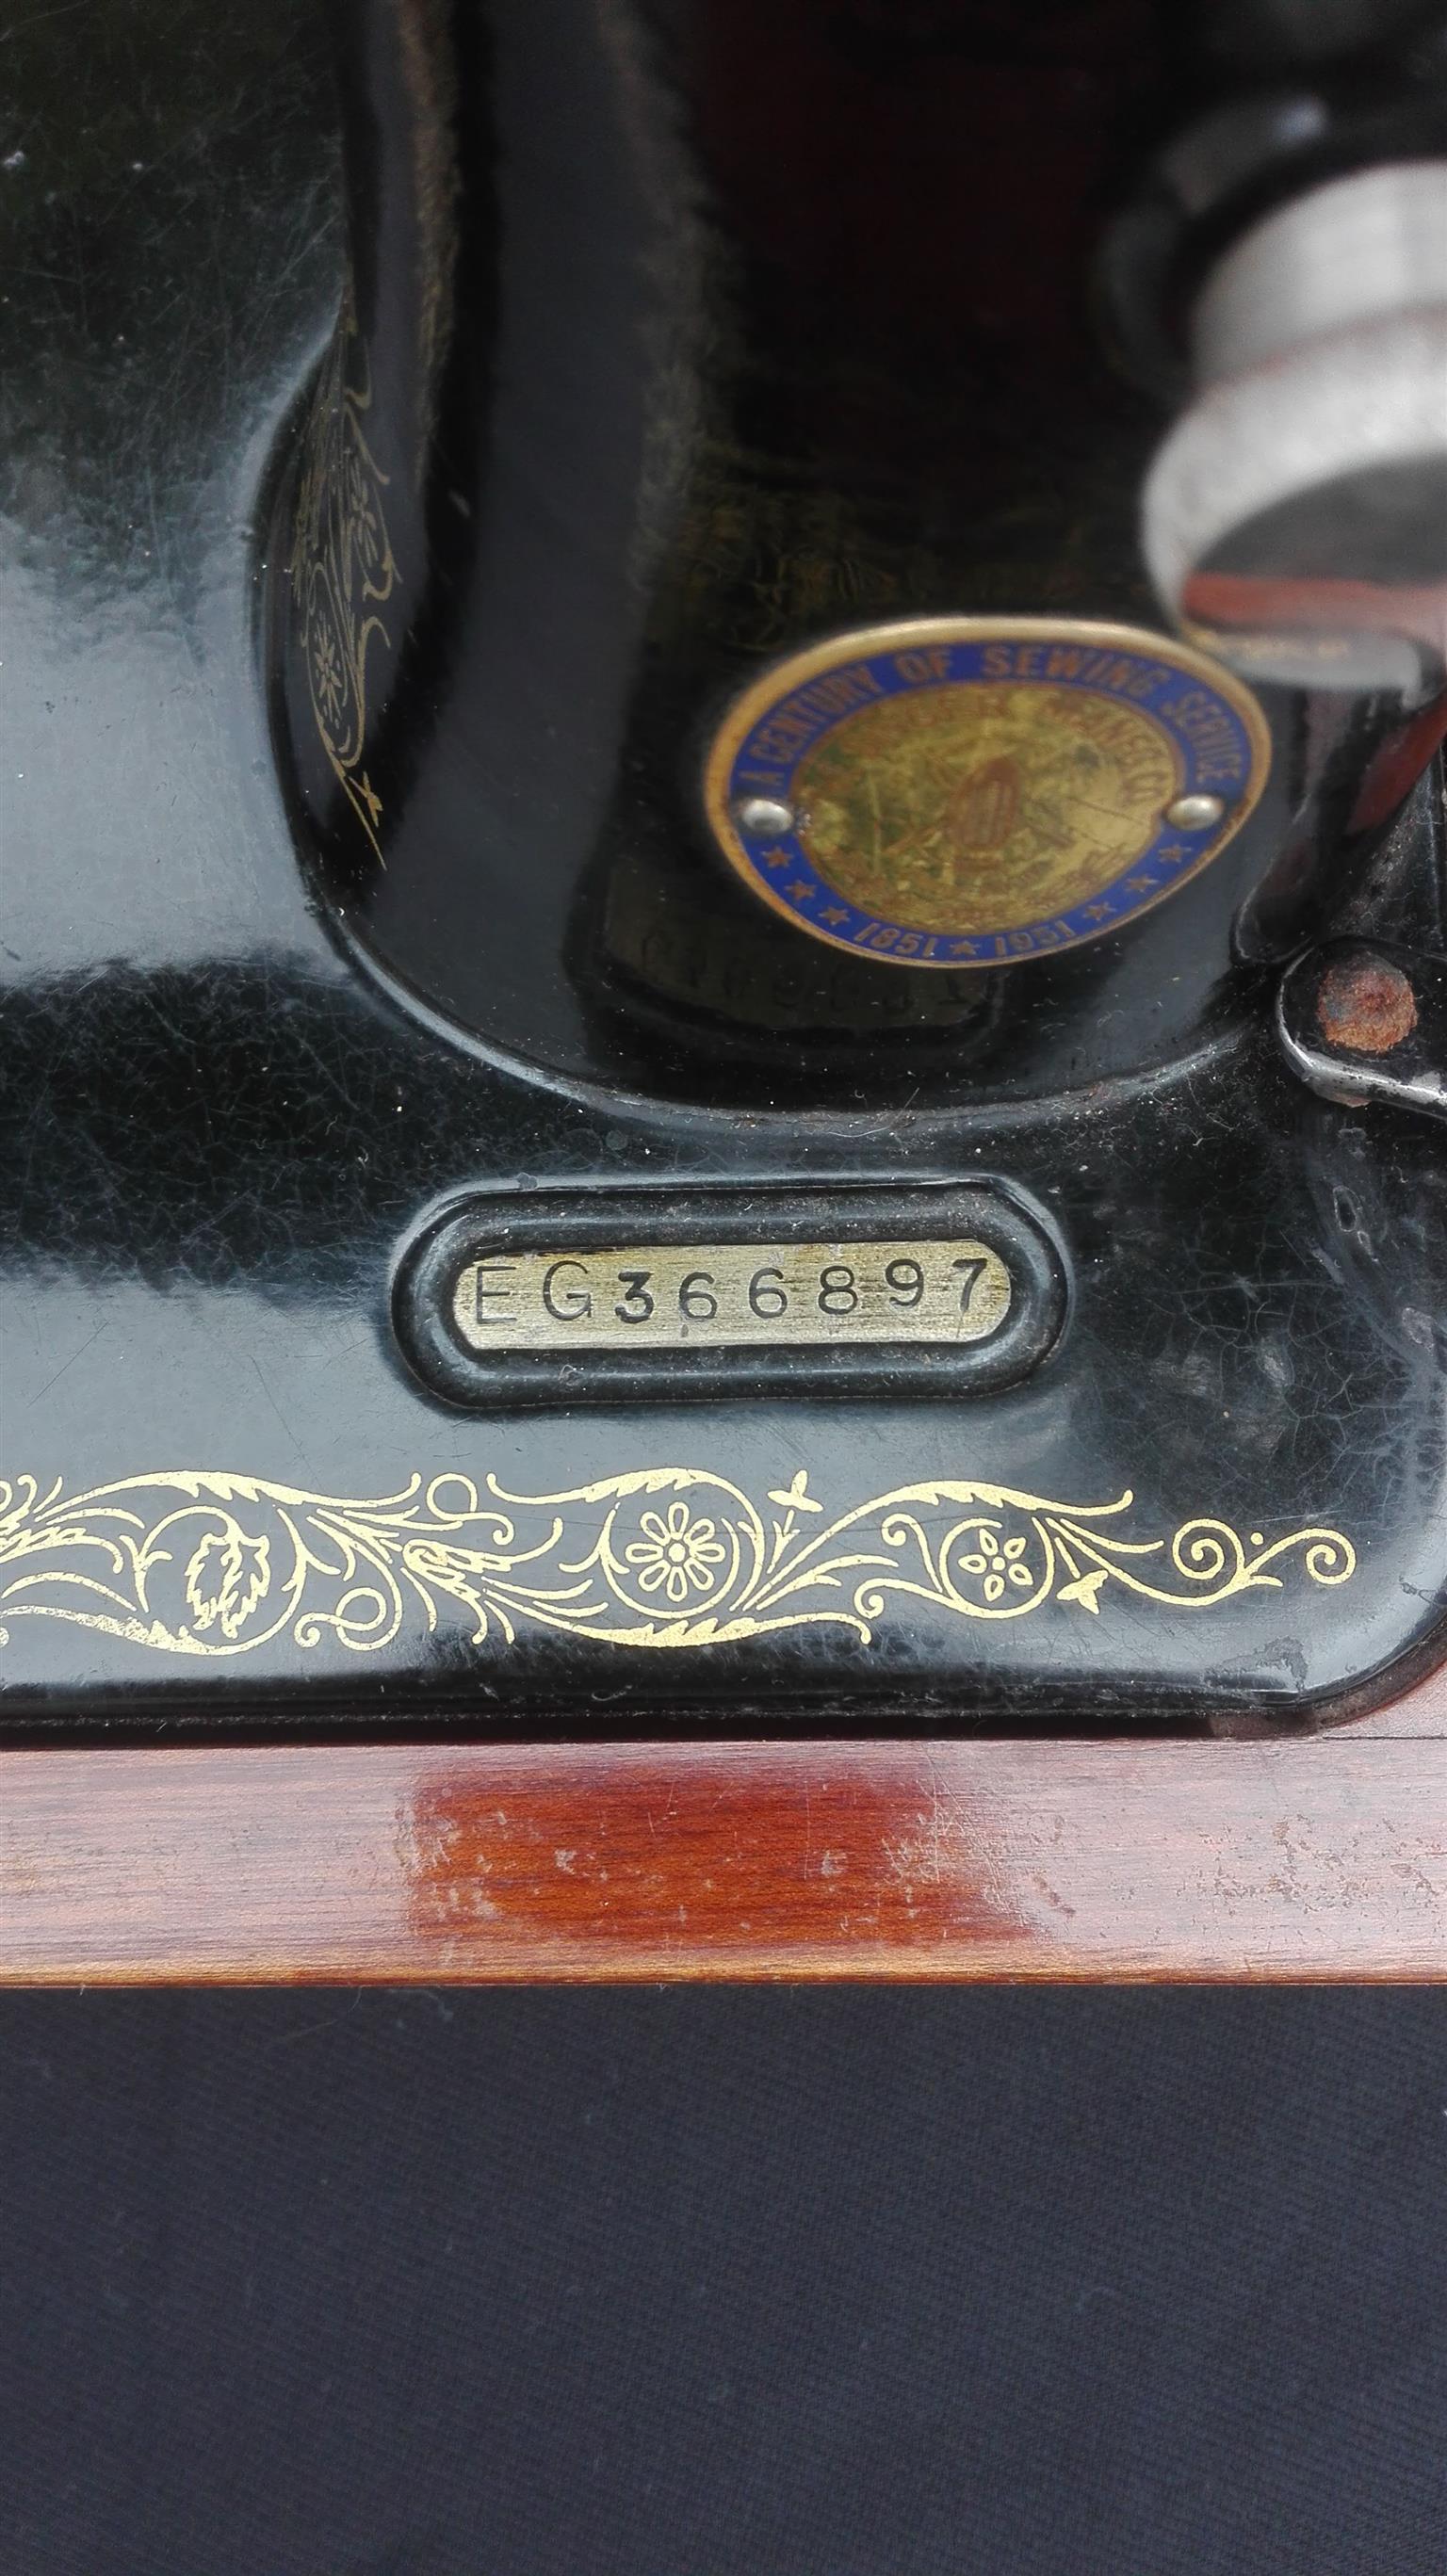 1951 Singer Sewing Machine  (69 Years old )